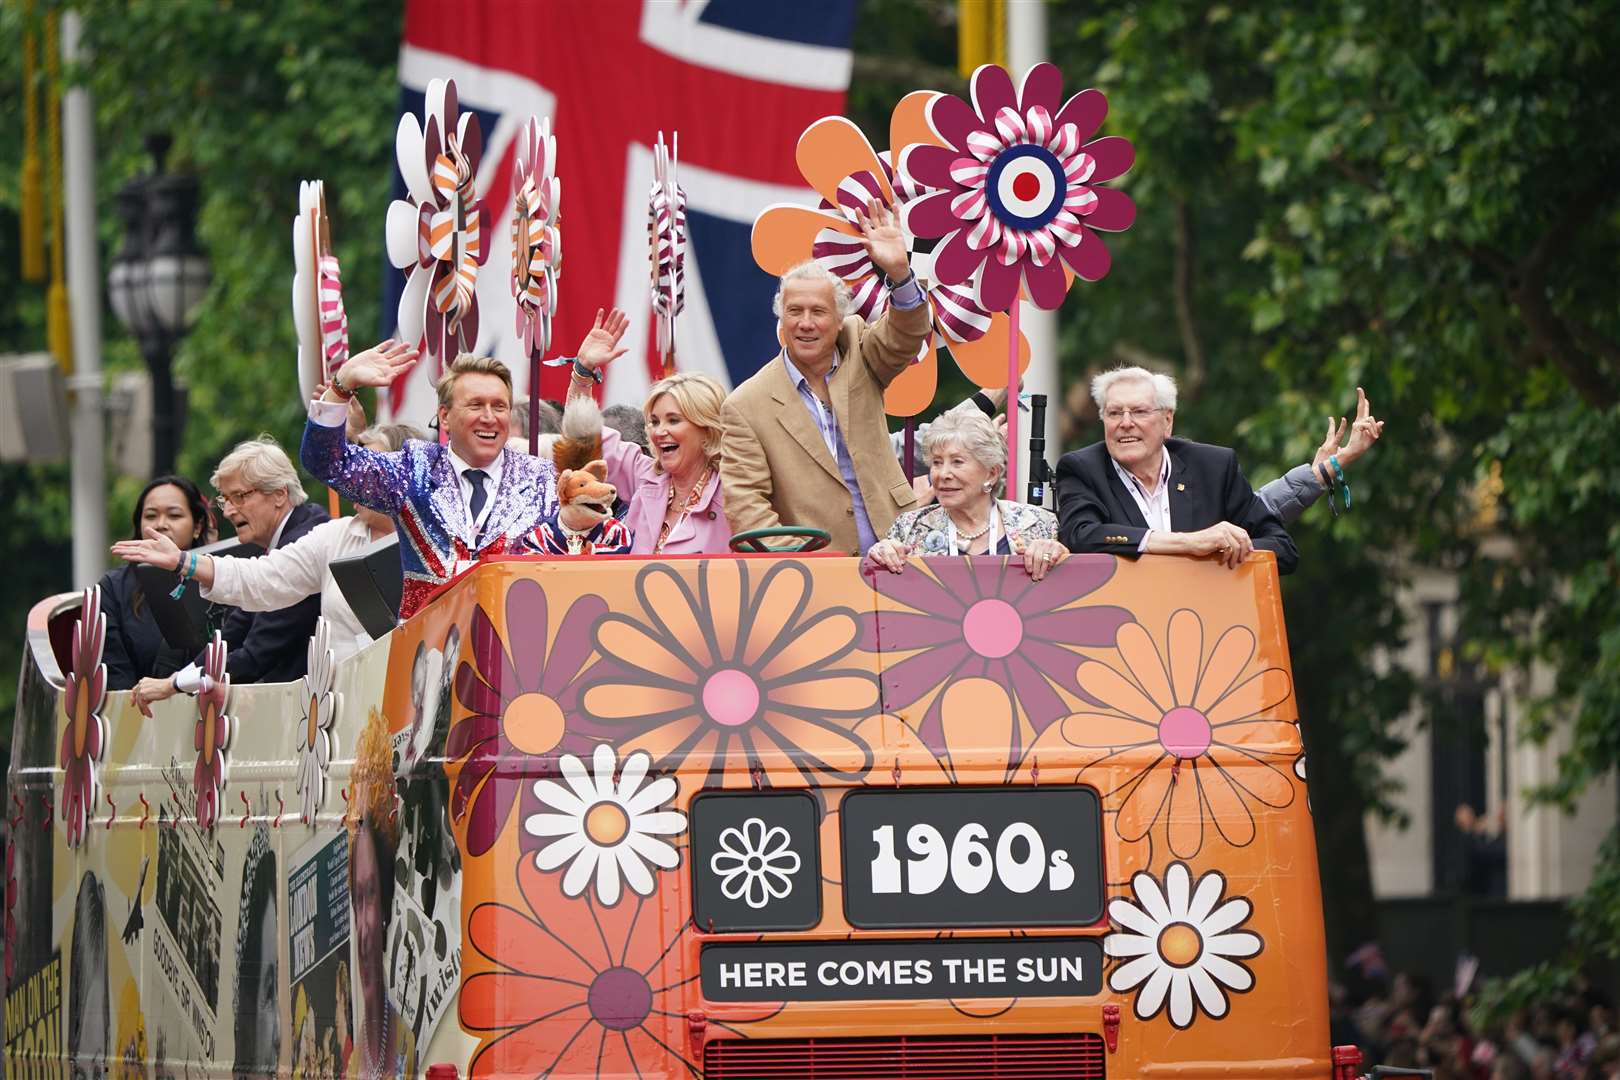 Basil Brush, Anthea Turner, Peter Duncan, Valerie Singleton and Peter Purves during the Platinum Jubilee Pageant in front of Buckingham Palace, London, on day four of the Platinum Jubilee celebrations (Yui Mok/PA)